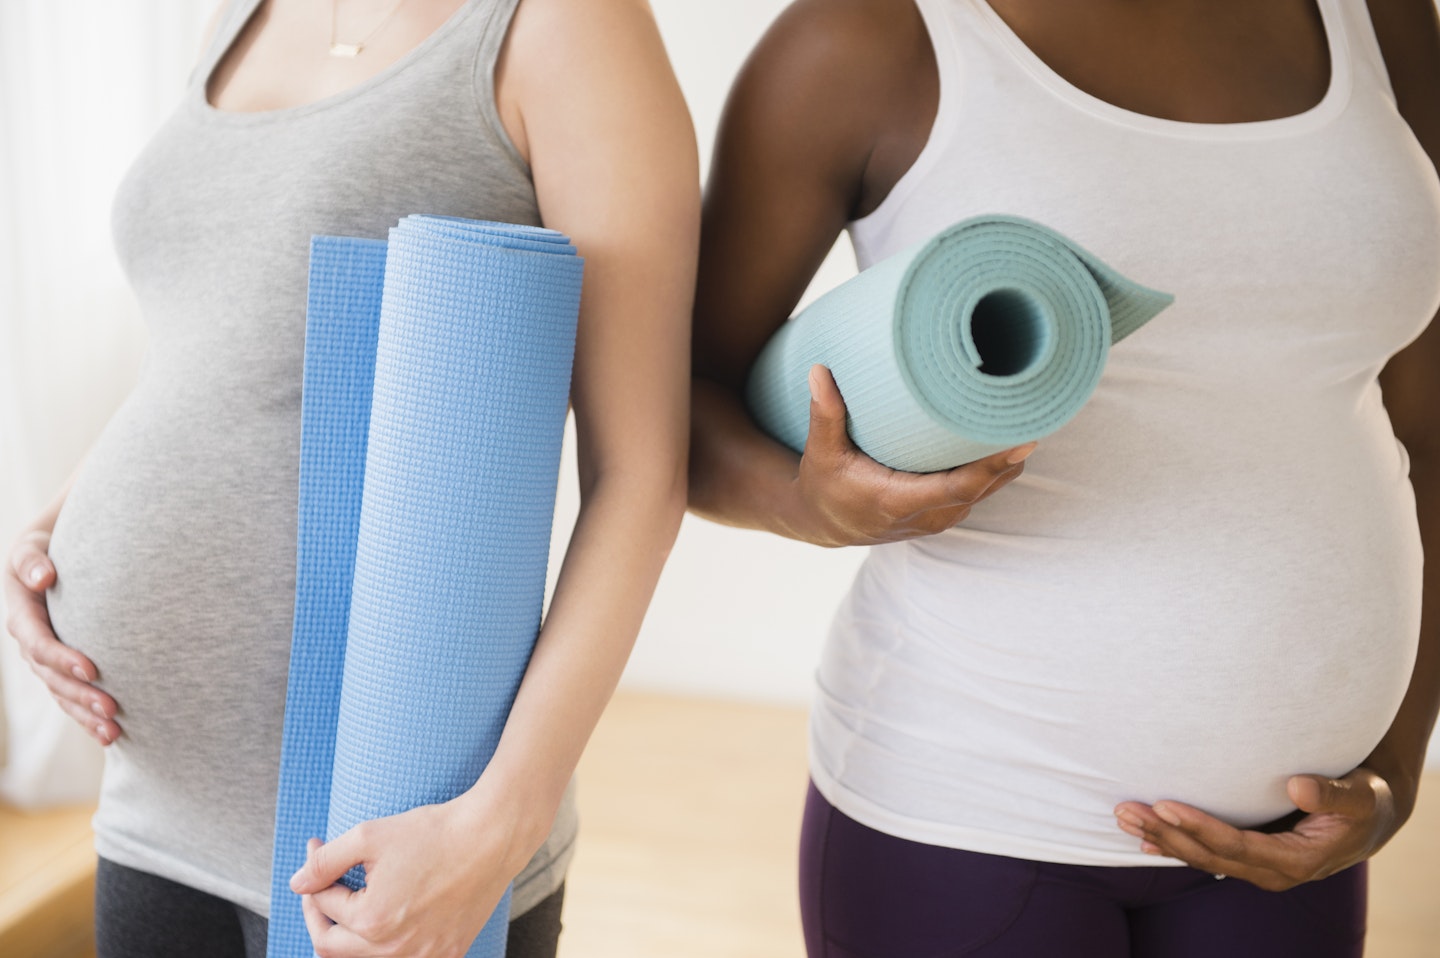 A guide to exercise during pregnancy